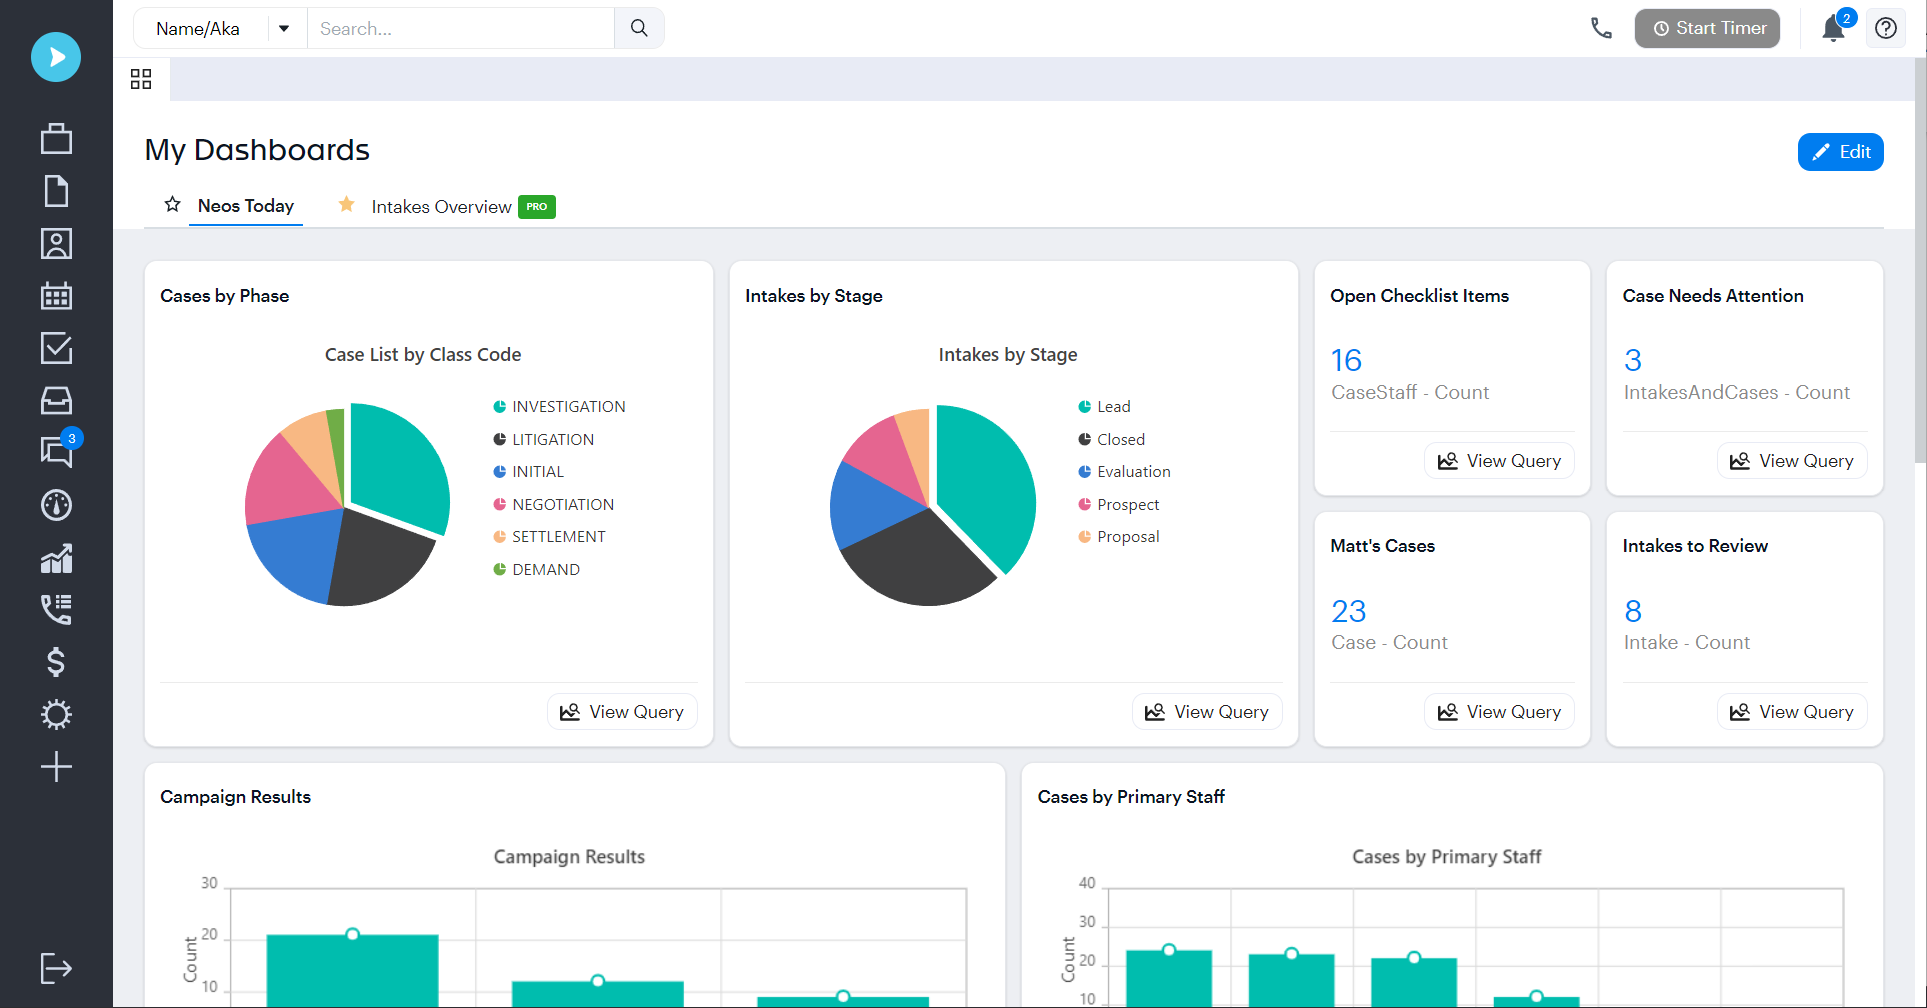 Image of Neos product dashboard